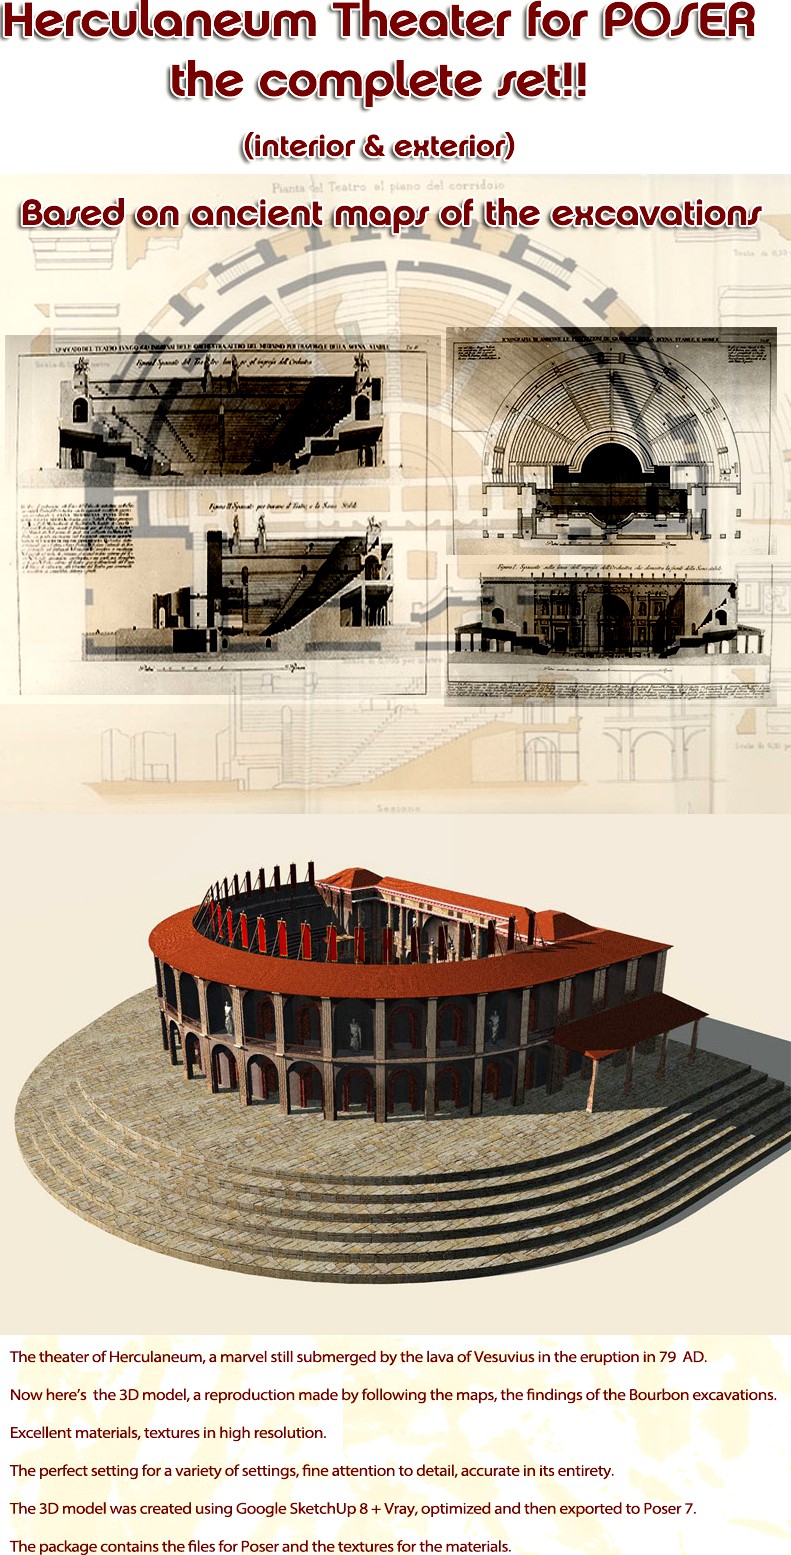 Herculaneum Theater - COMPLETE - for Poser